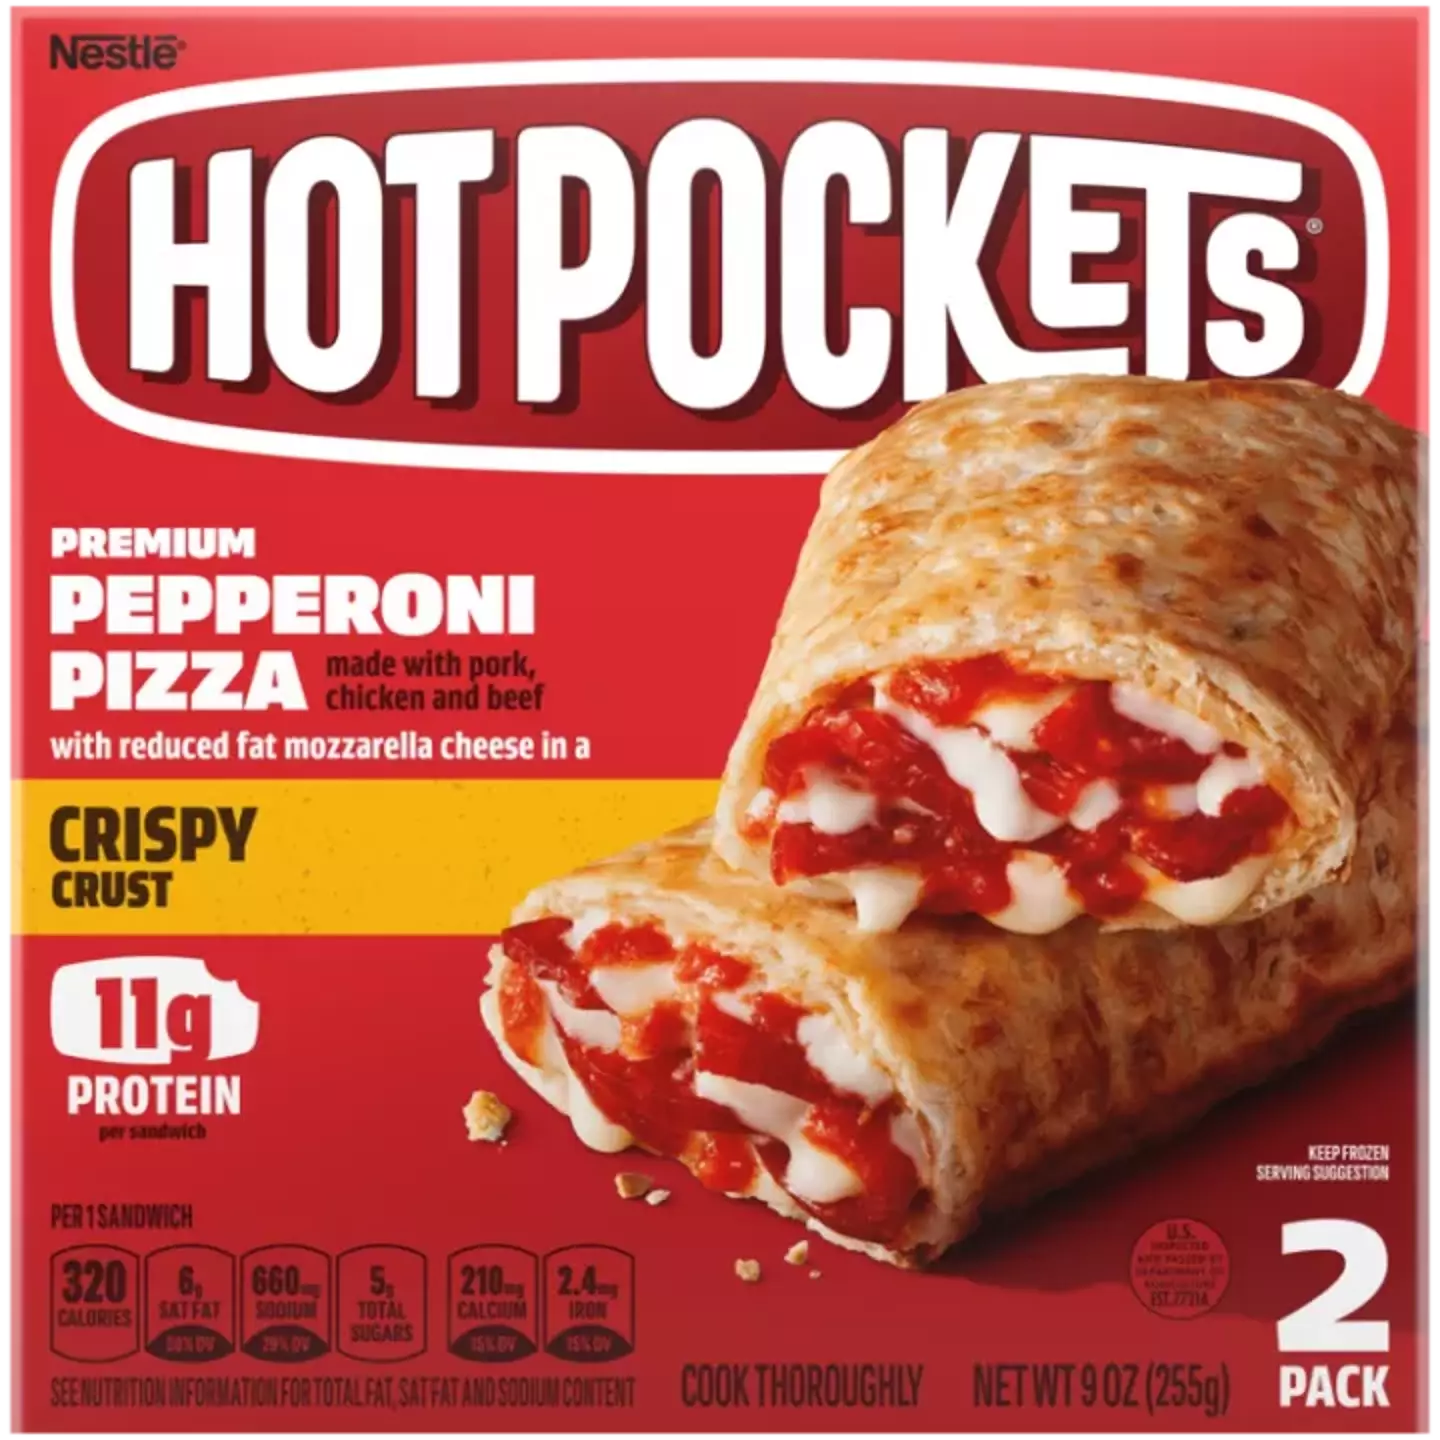 The shooting is said to have broken out over a disagreement about Hot Pockets.